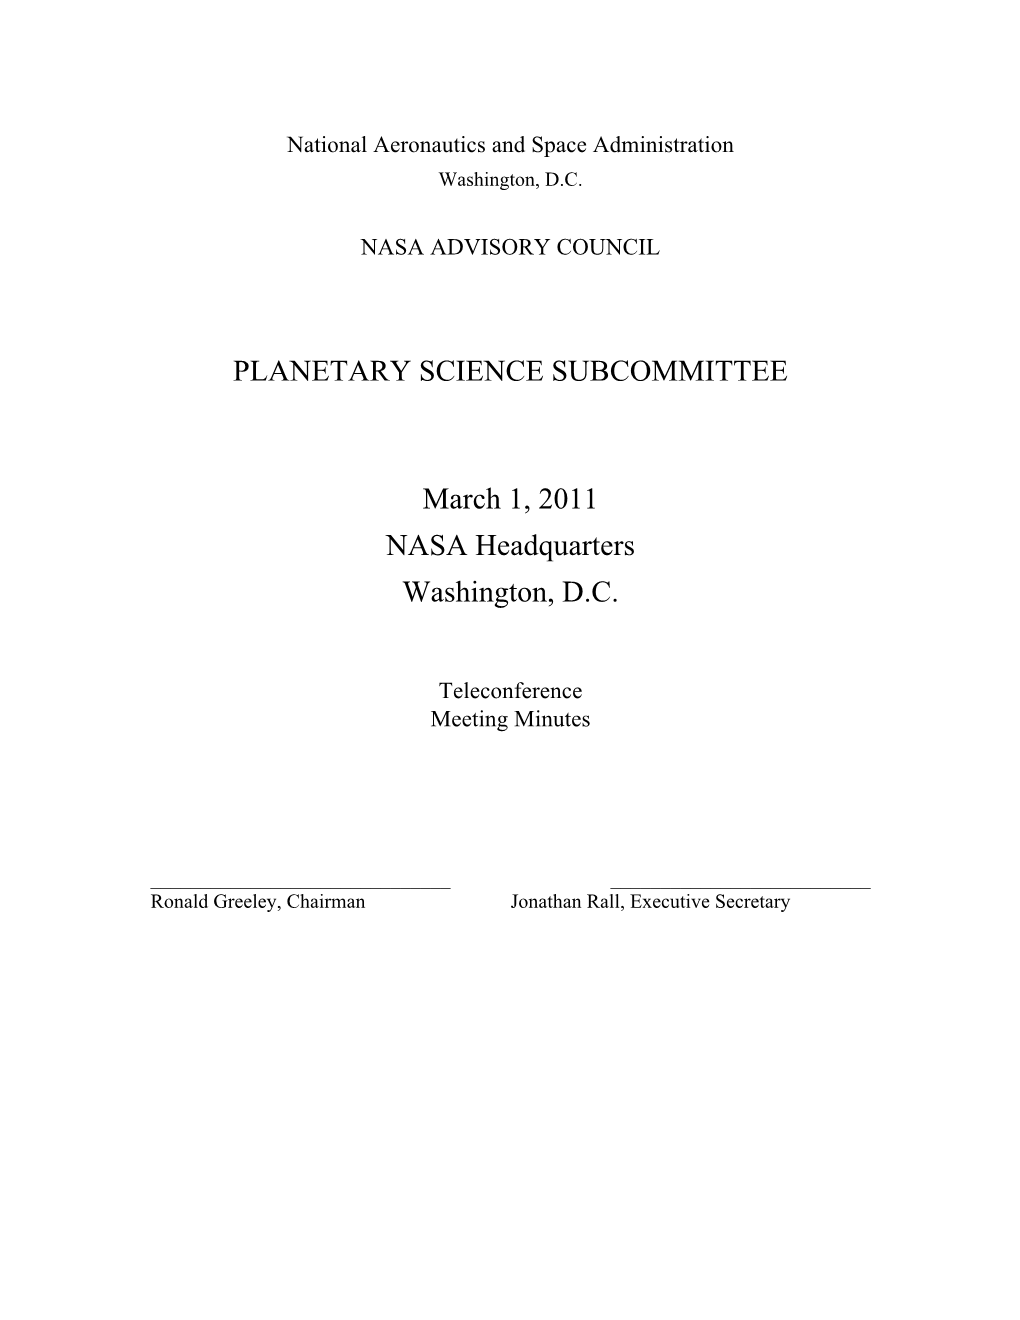 PLANETARY SCIENCE SUBCOMMITTEE March 1, 2011